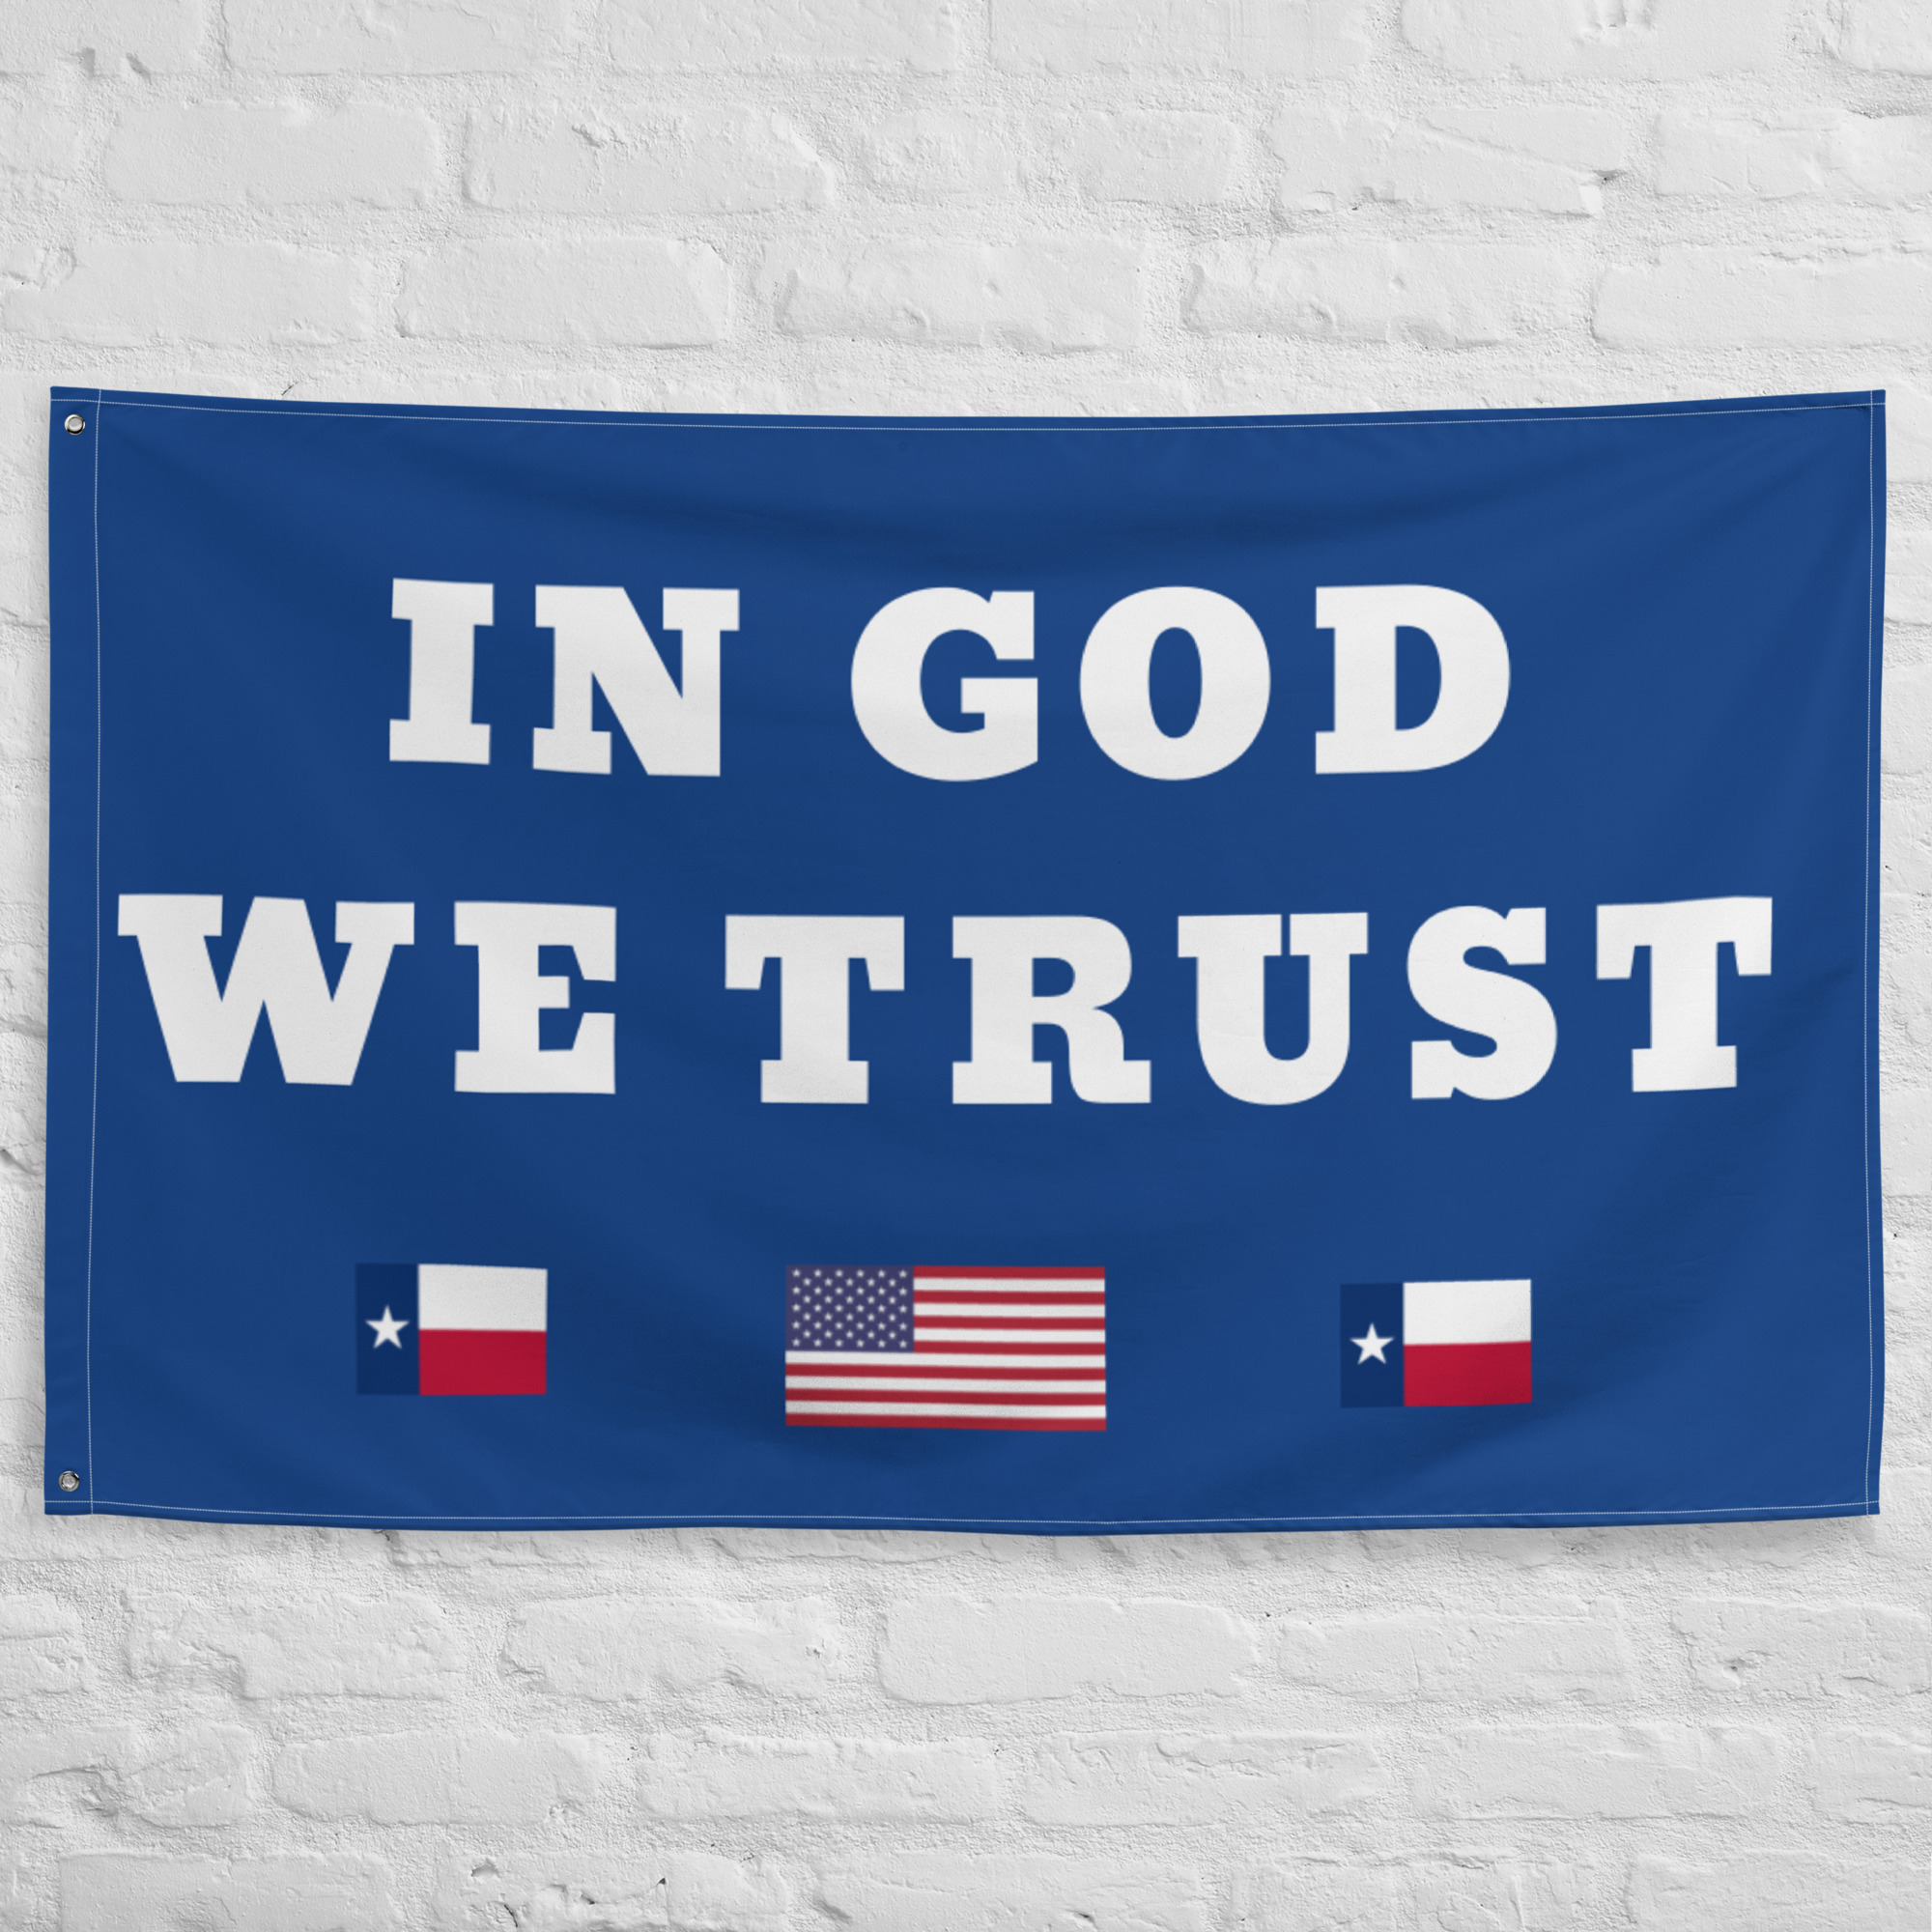 IN GOD WE TRUST #Texas Flag Donate it to your School District Flags Rosary.Team